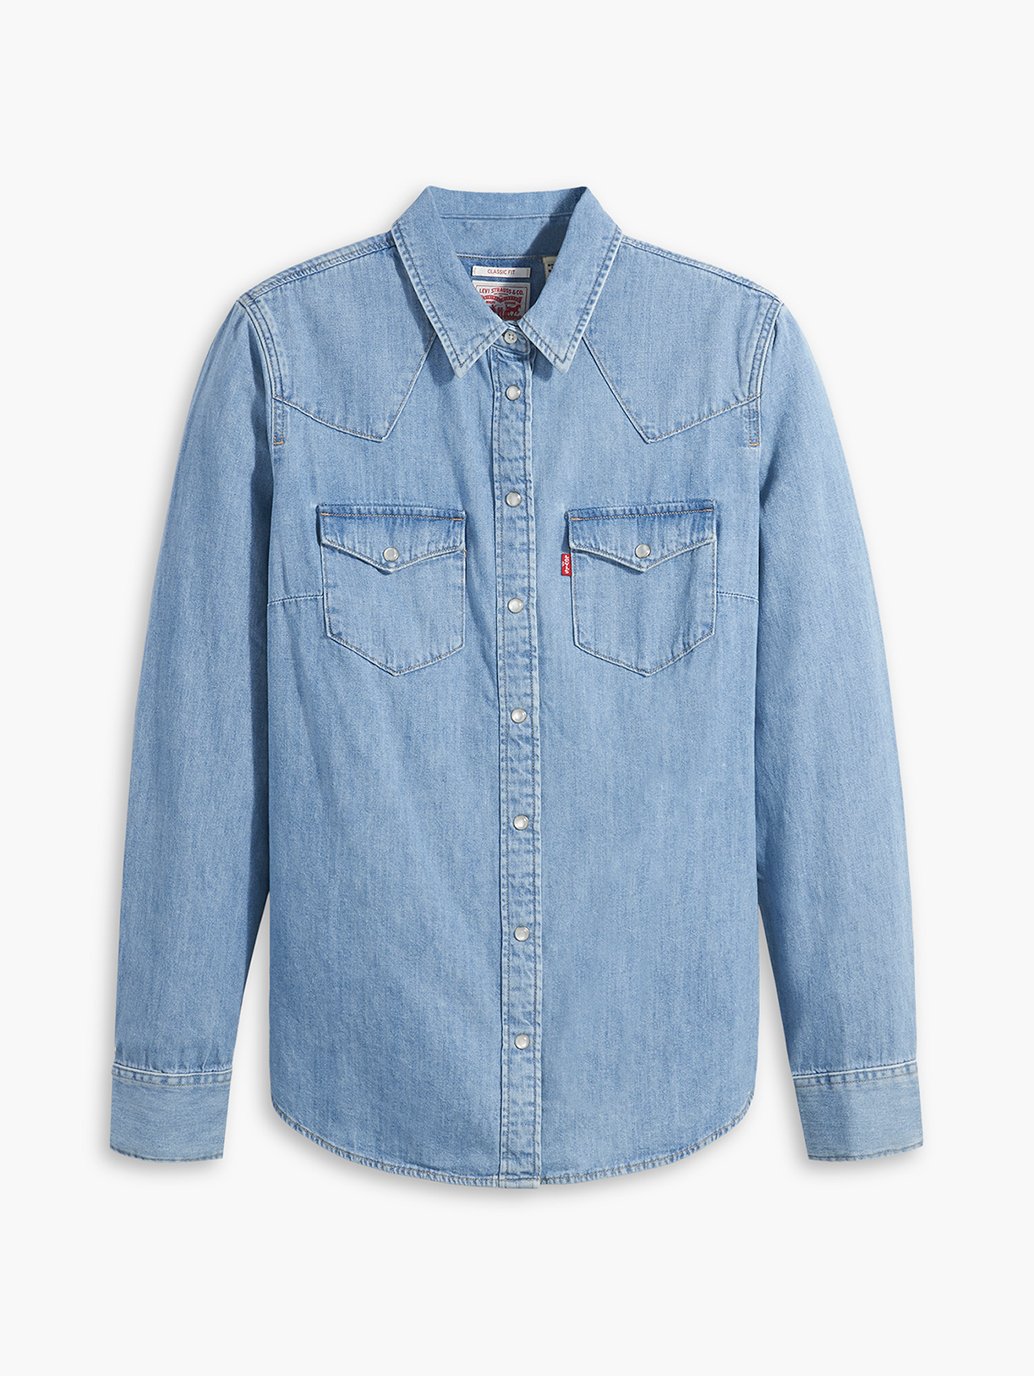 Buy Ultimate Western Shirt | Levi's® Official Online Store MY